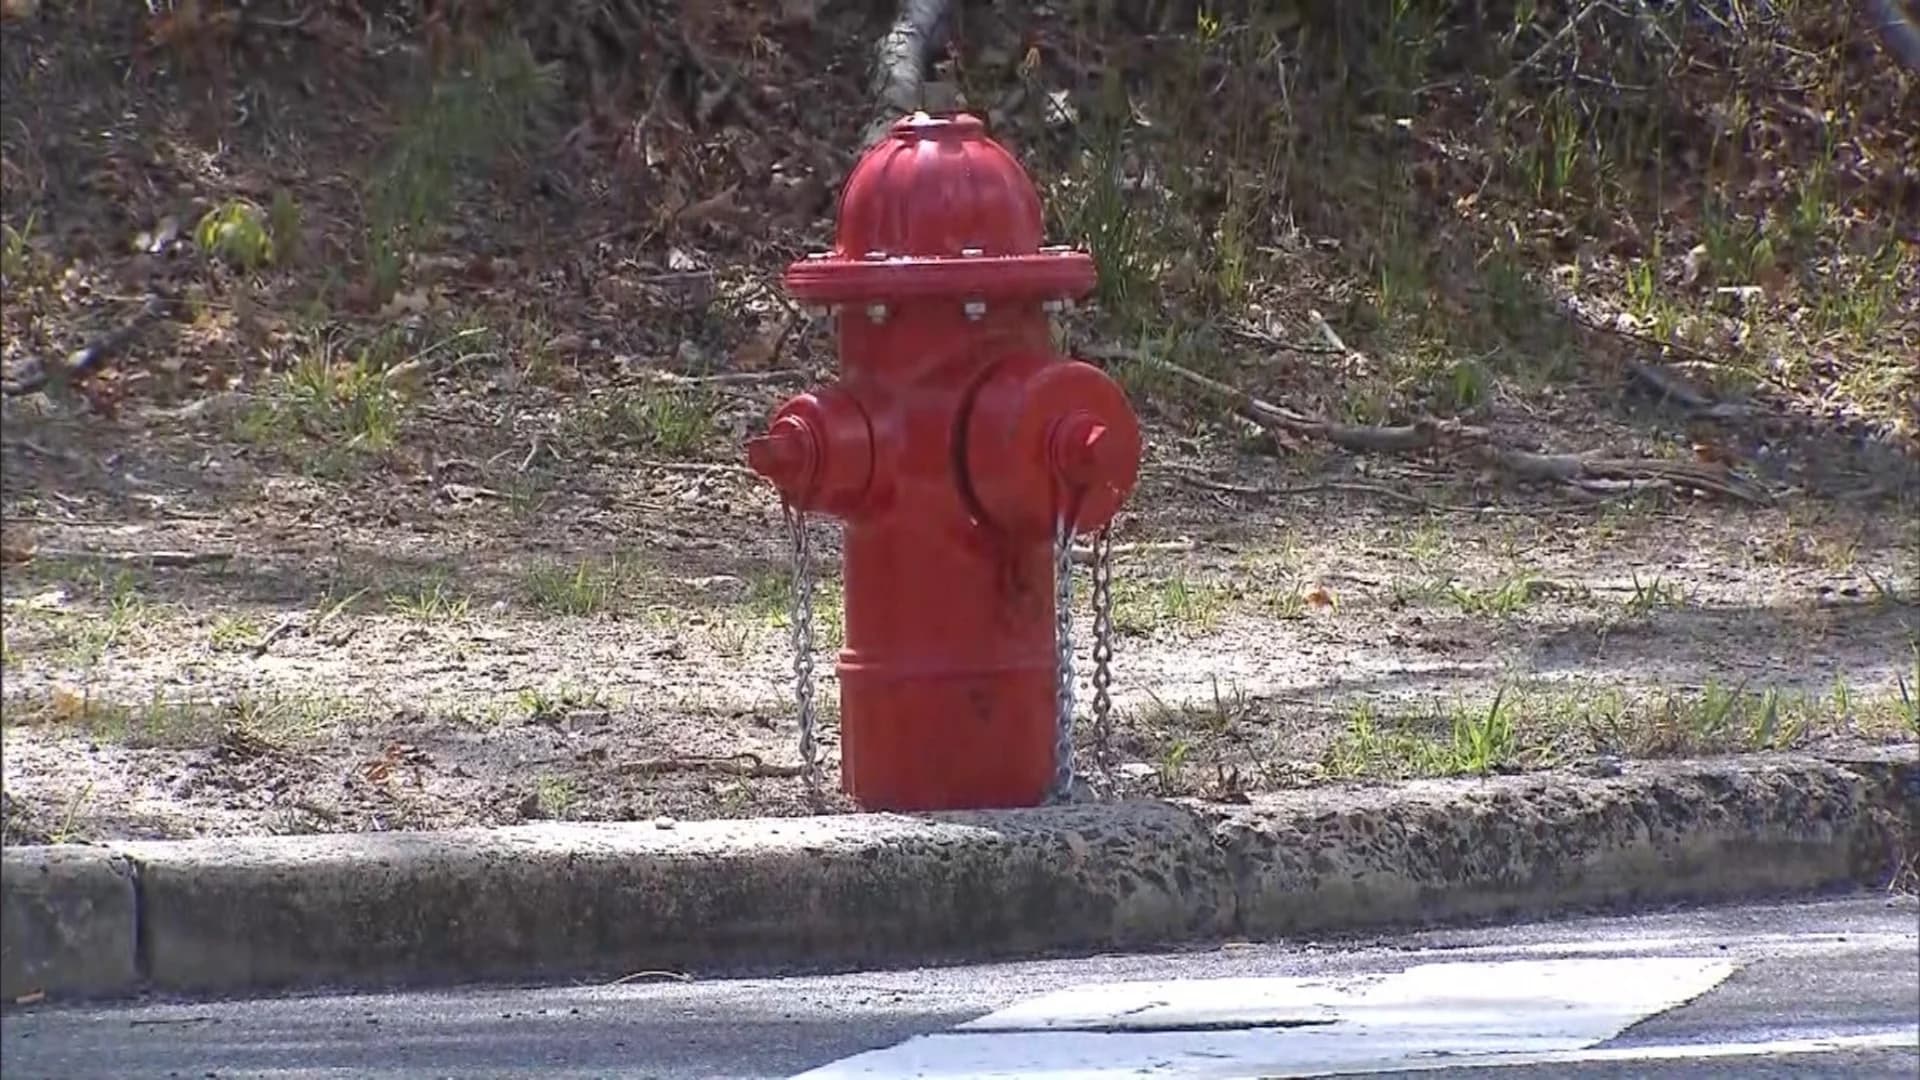 Police look for person who stole fire hydrant in Lacey Township